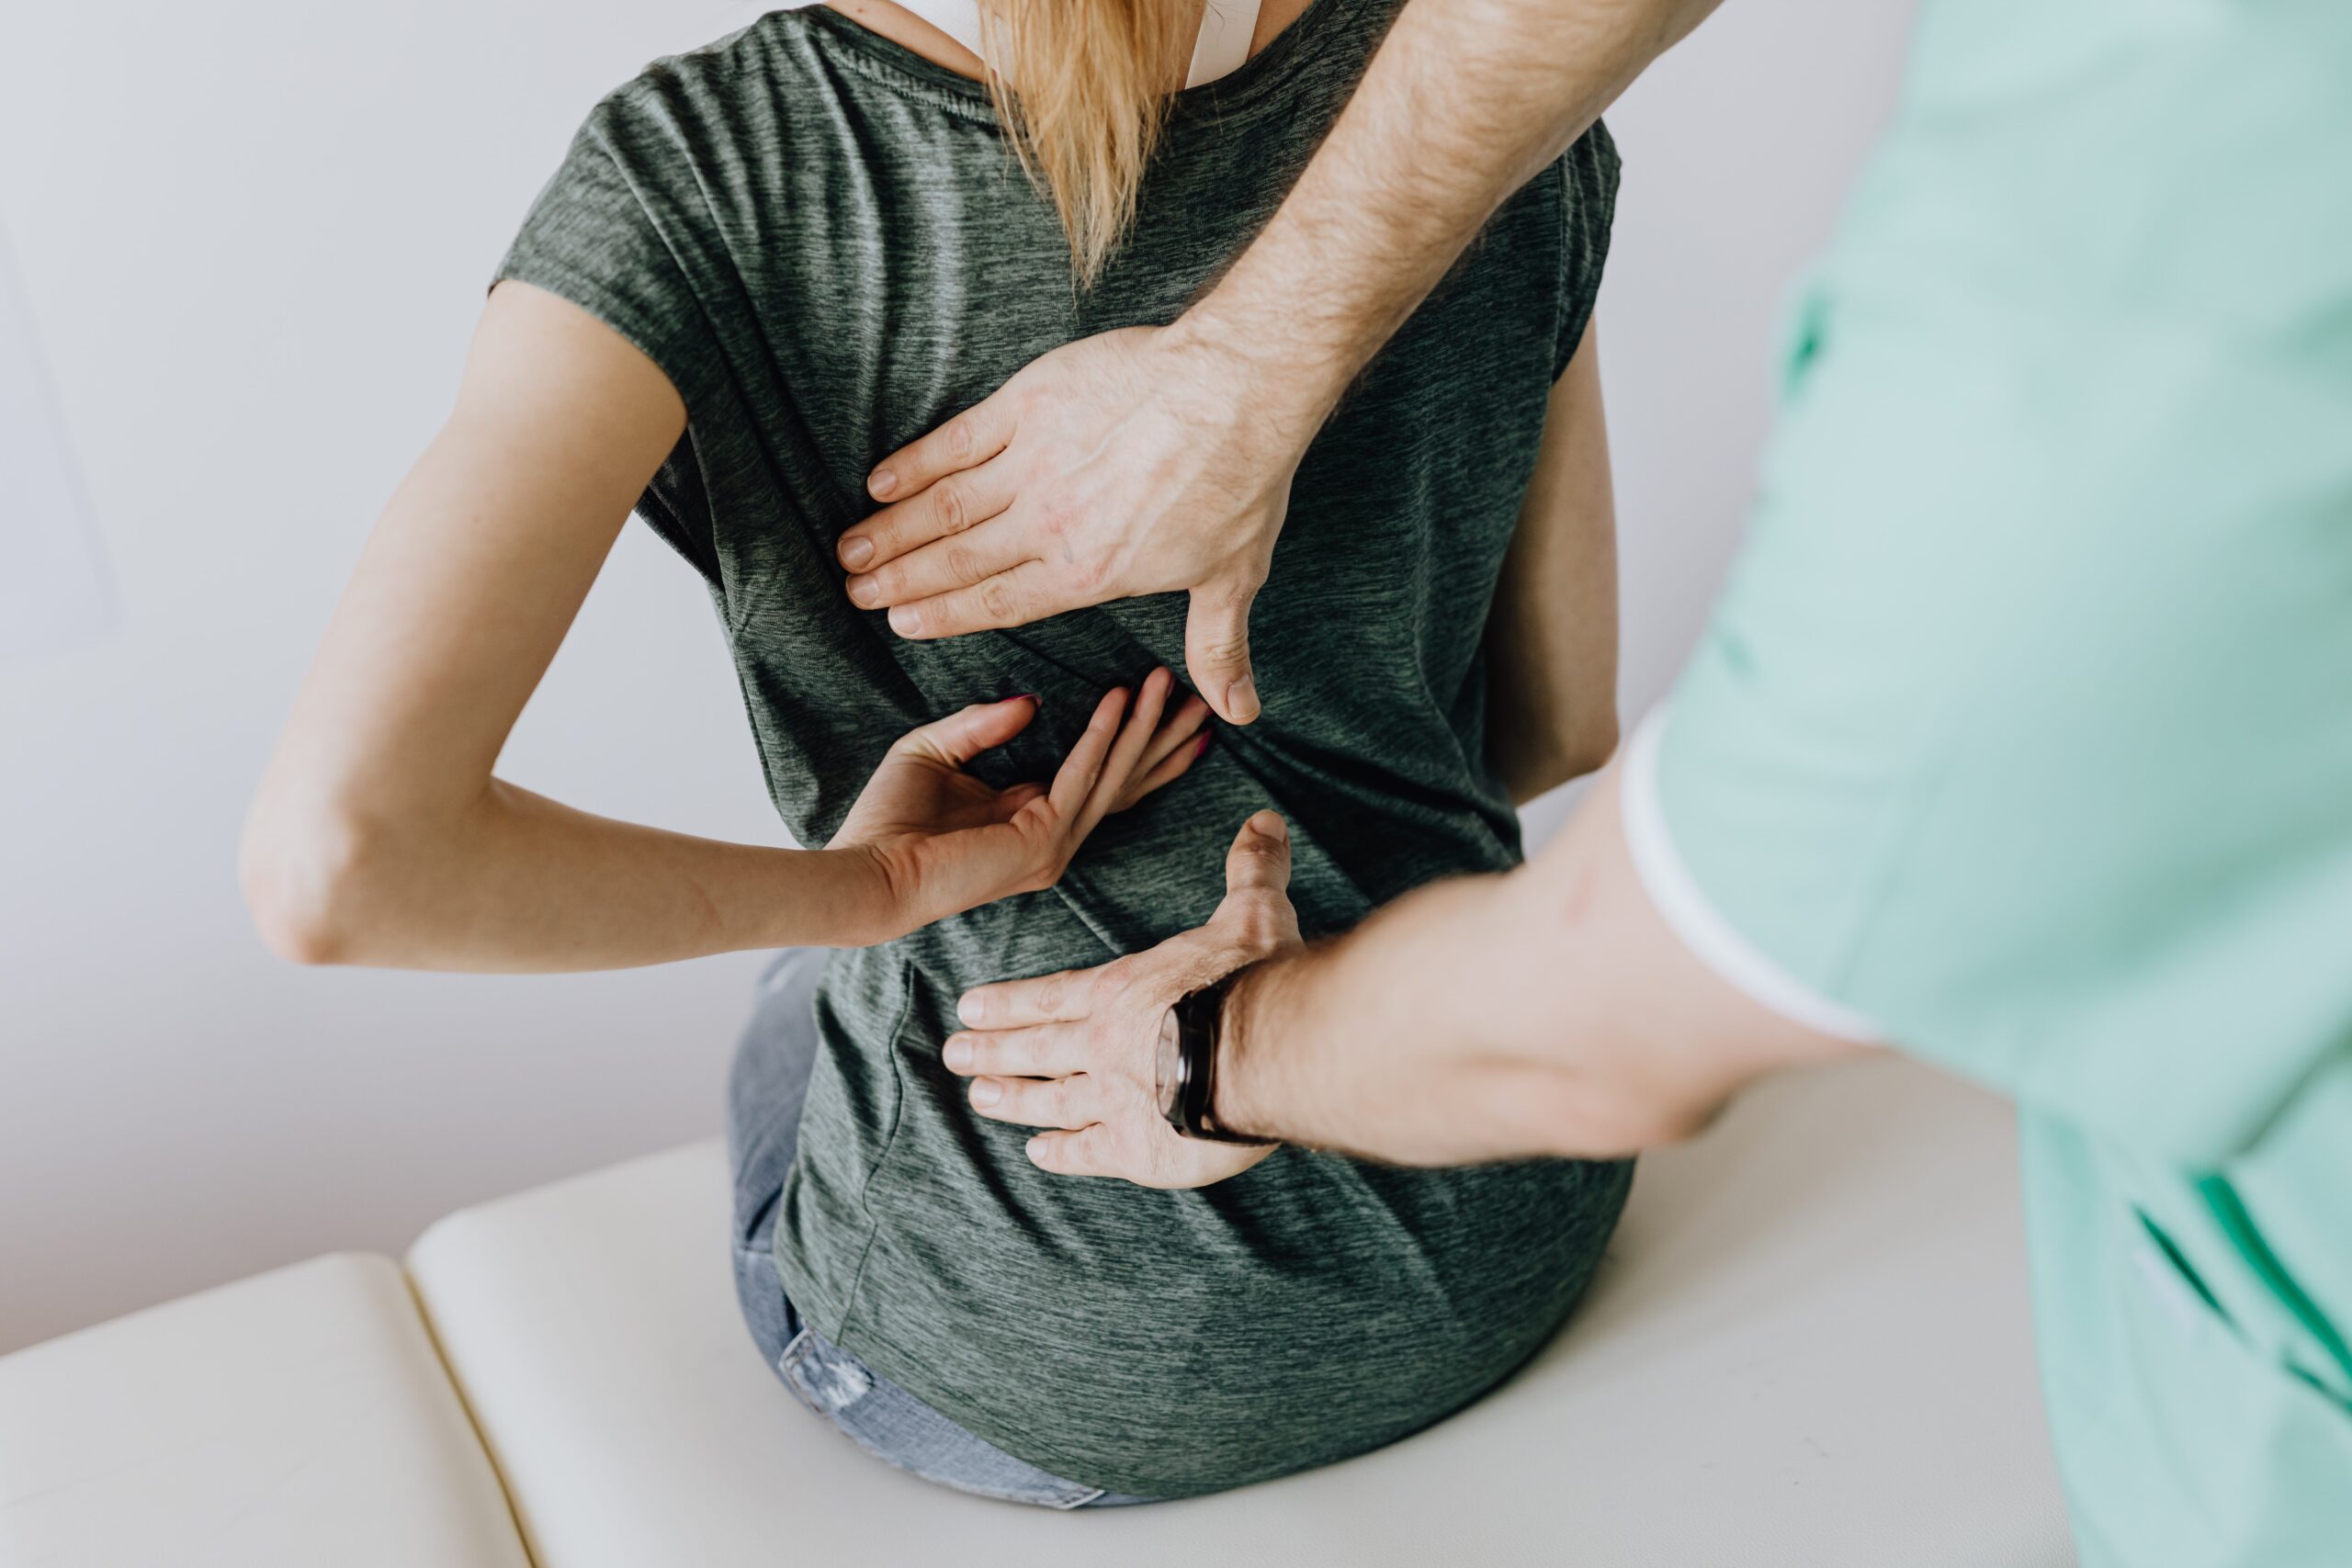 An image of a woman receiving chiropractic treatment on her back